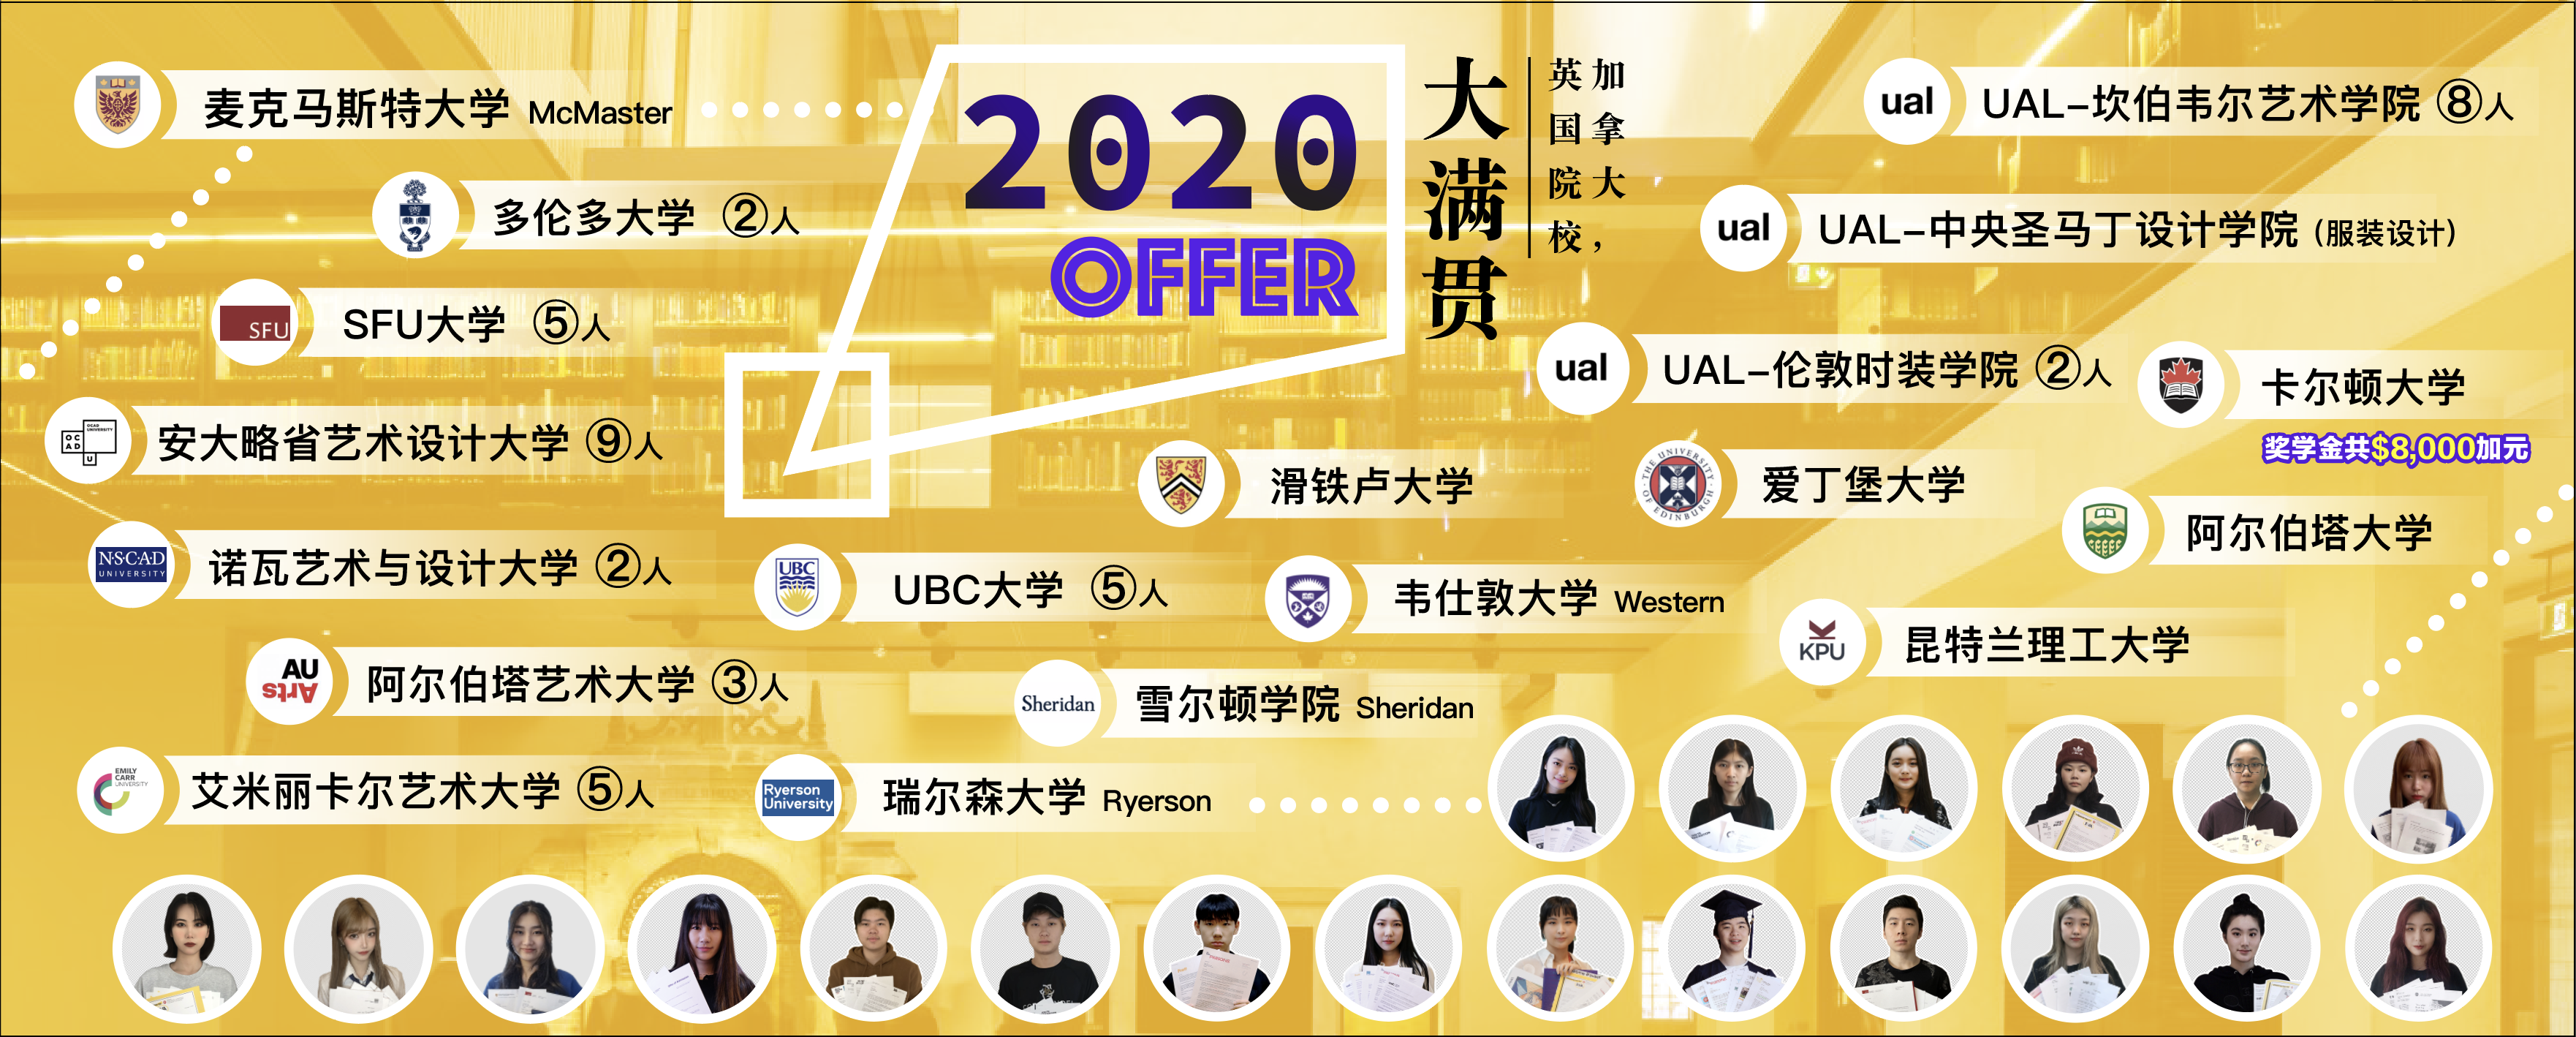 2020 student success and university admission offers